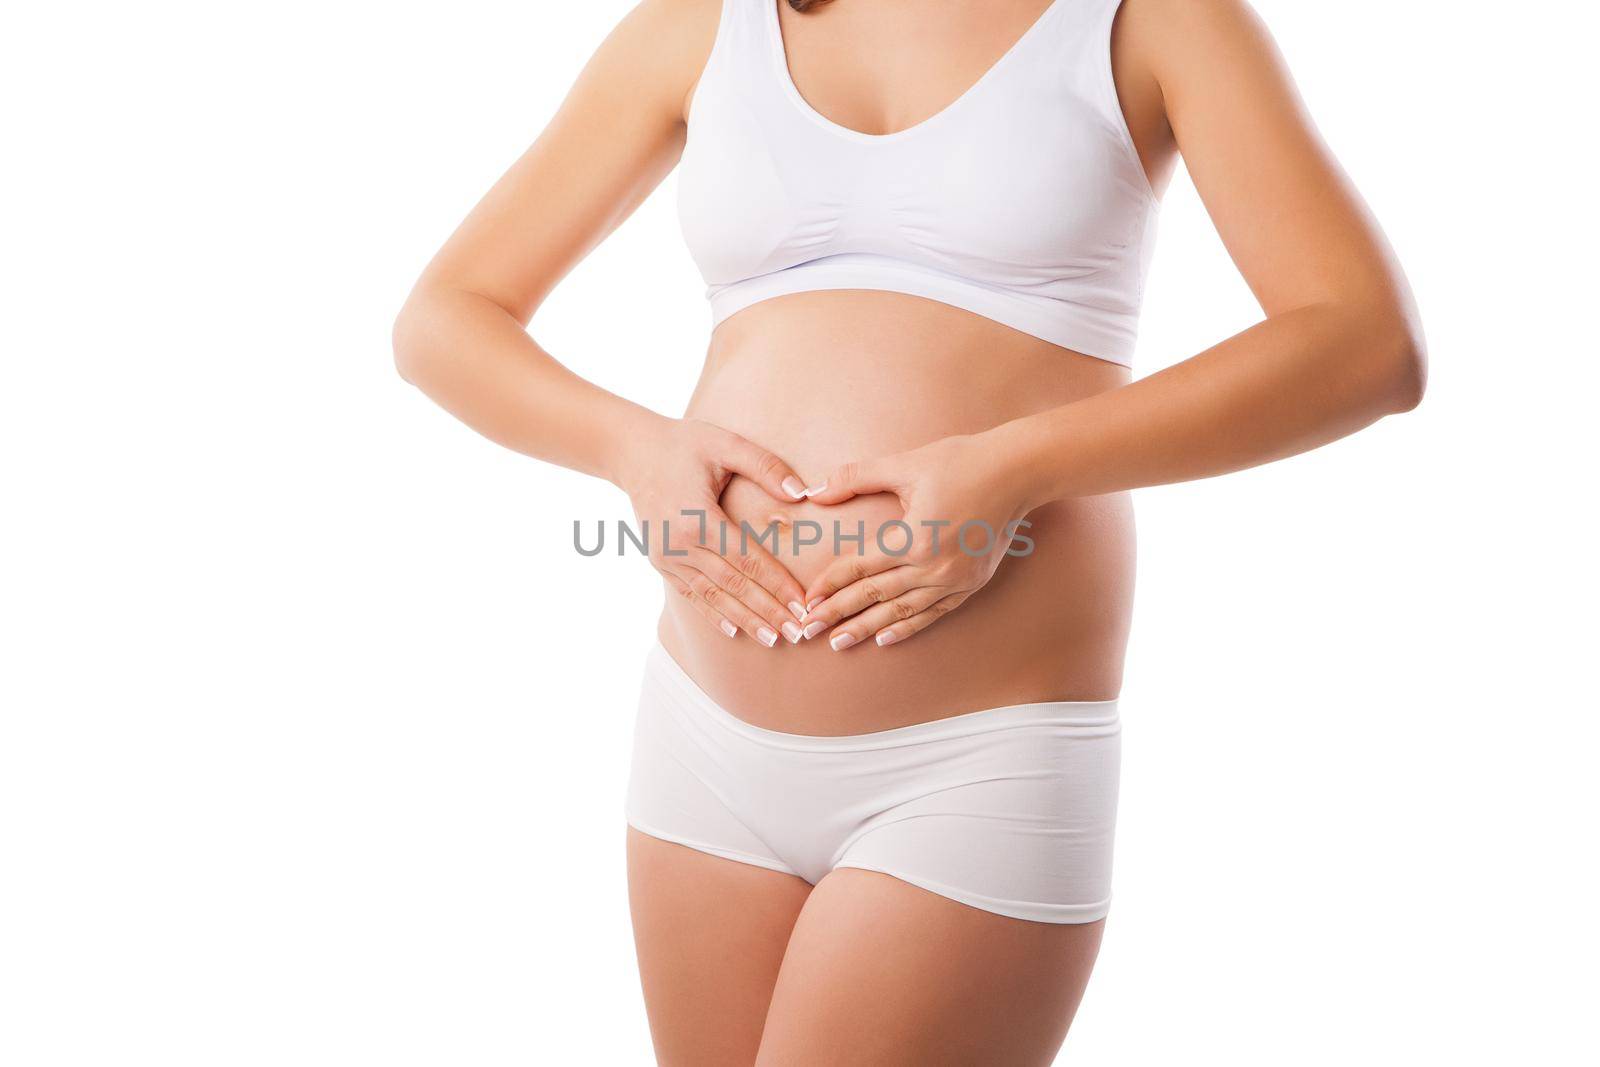 Pregnant woman forming heart out of her hands on her baby bump on white background.